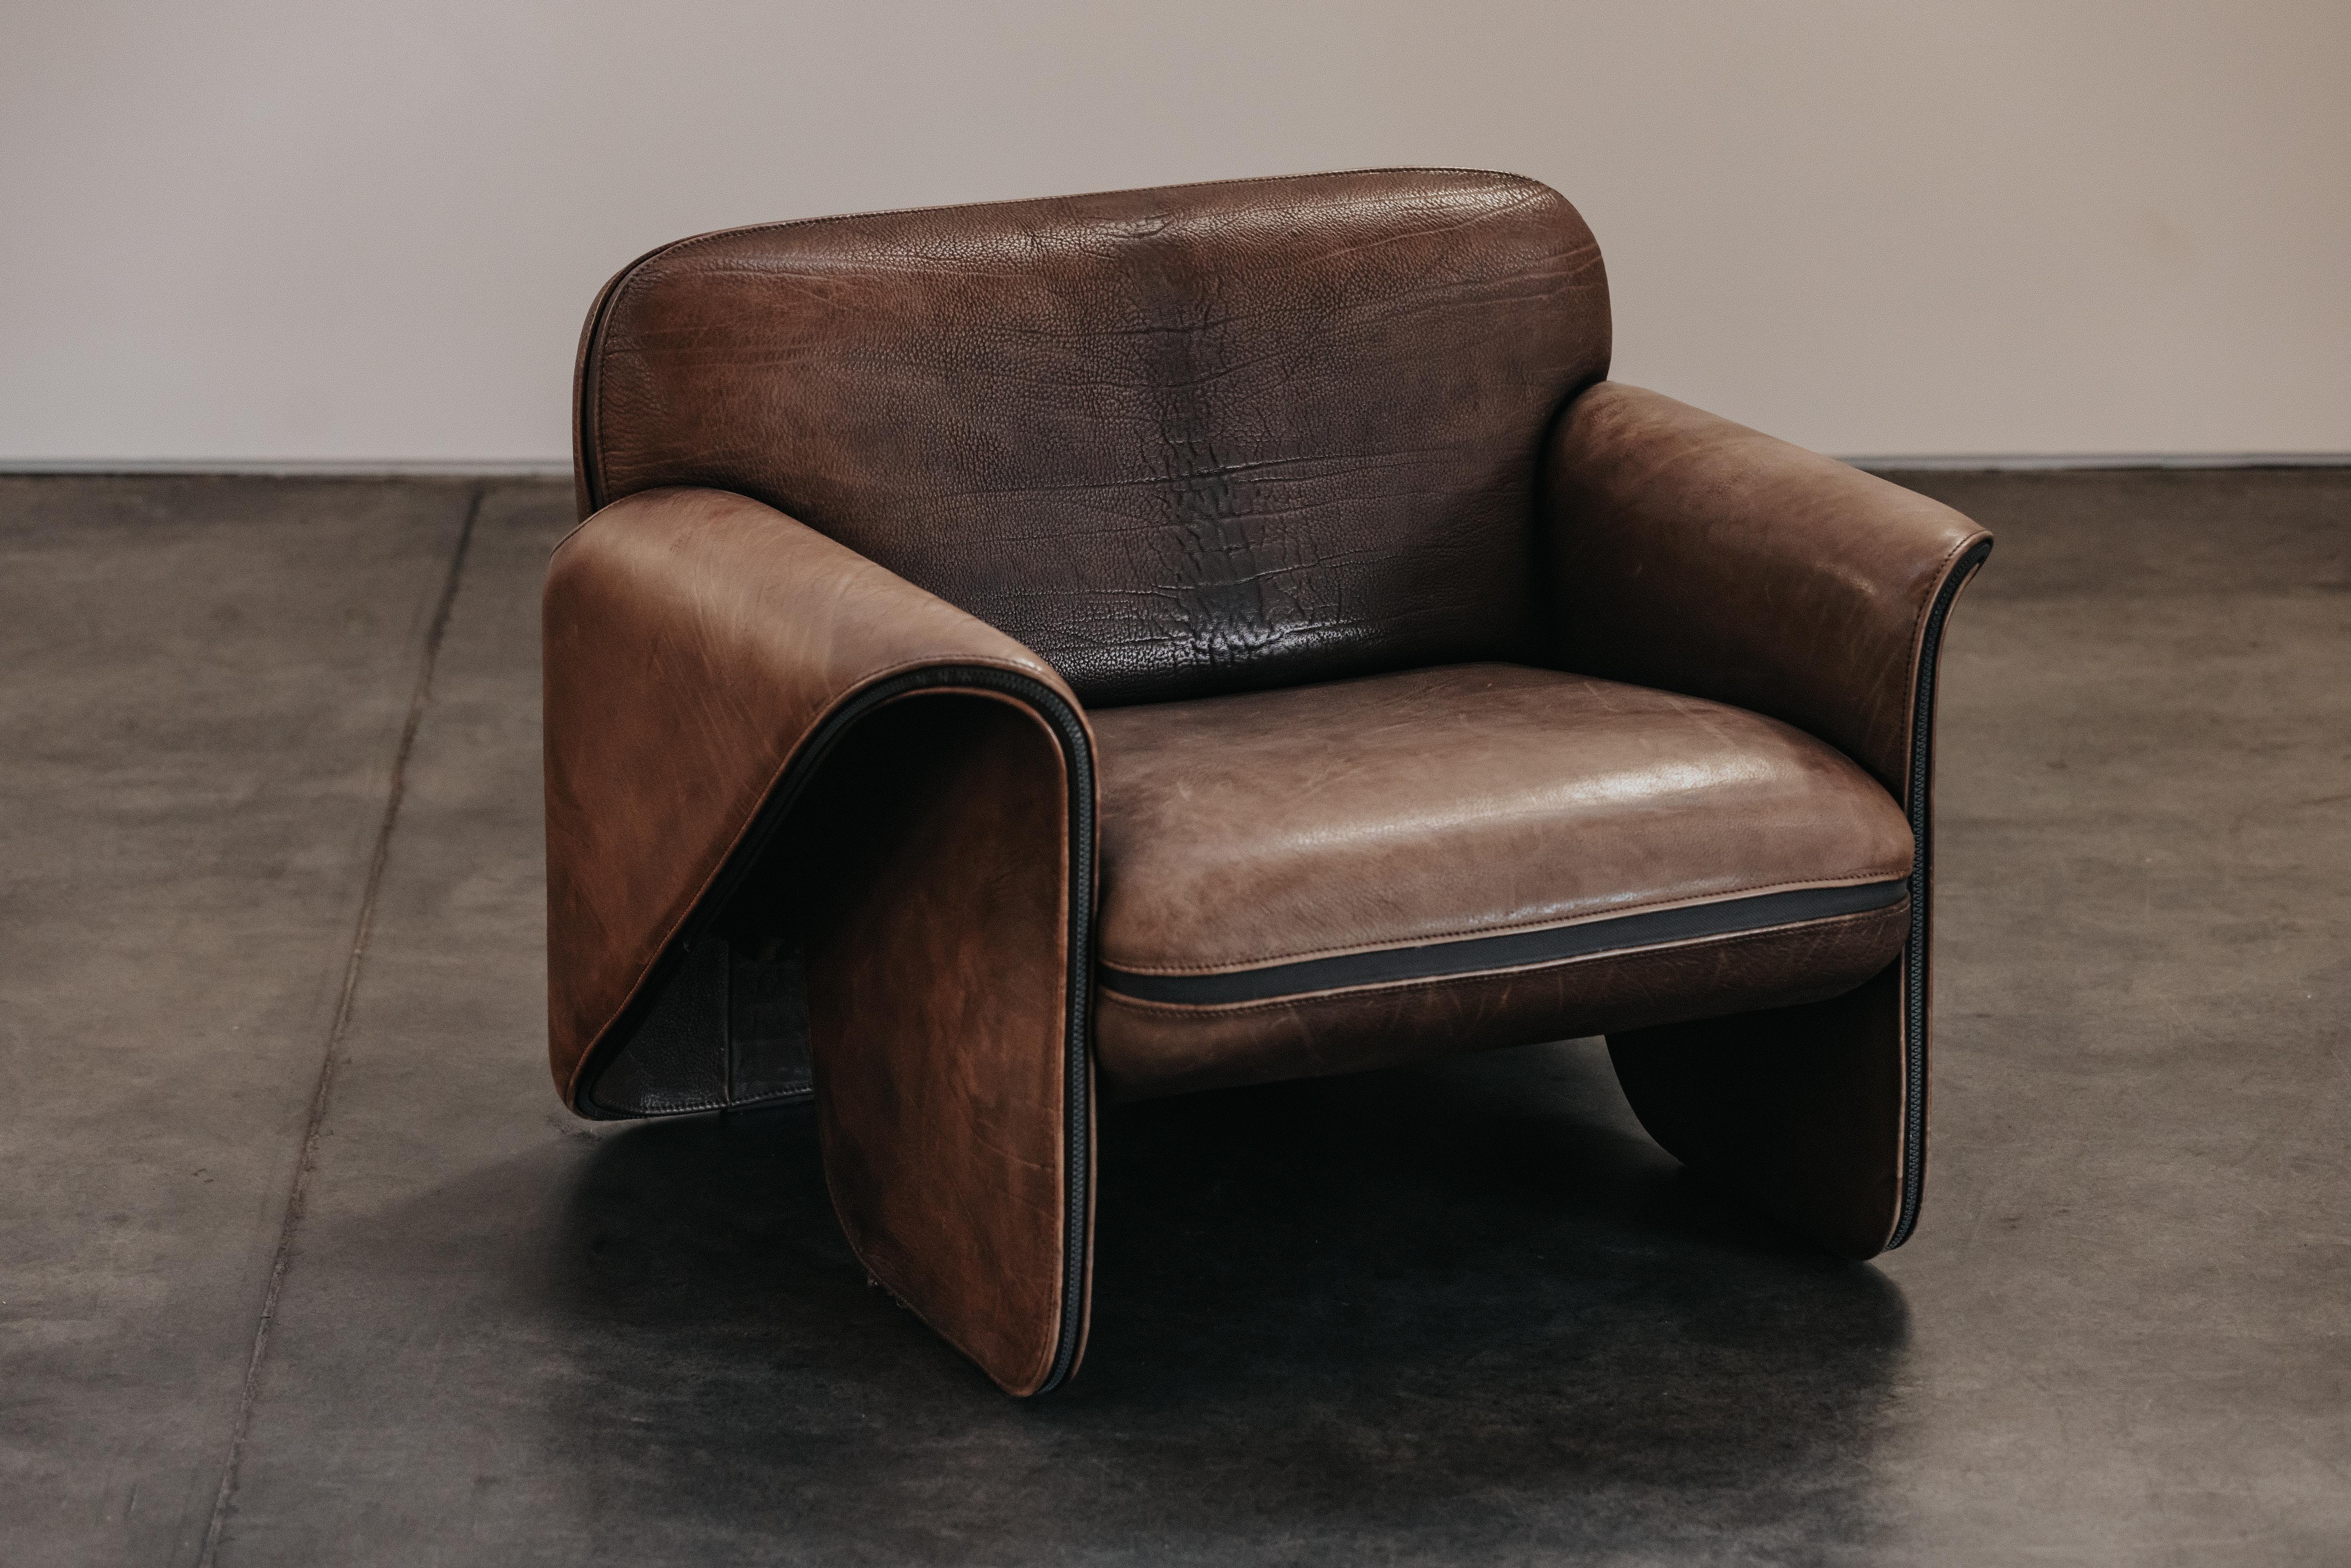 European Vintage Brown Leather De Sede DS125 Lounge Chair From Switzerland, Circa 1970